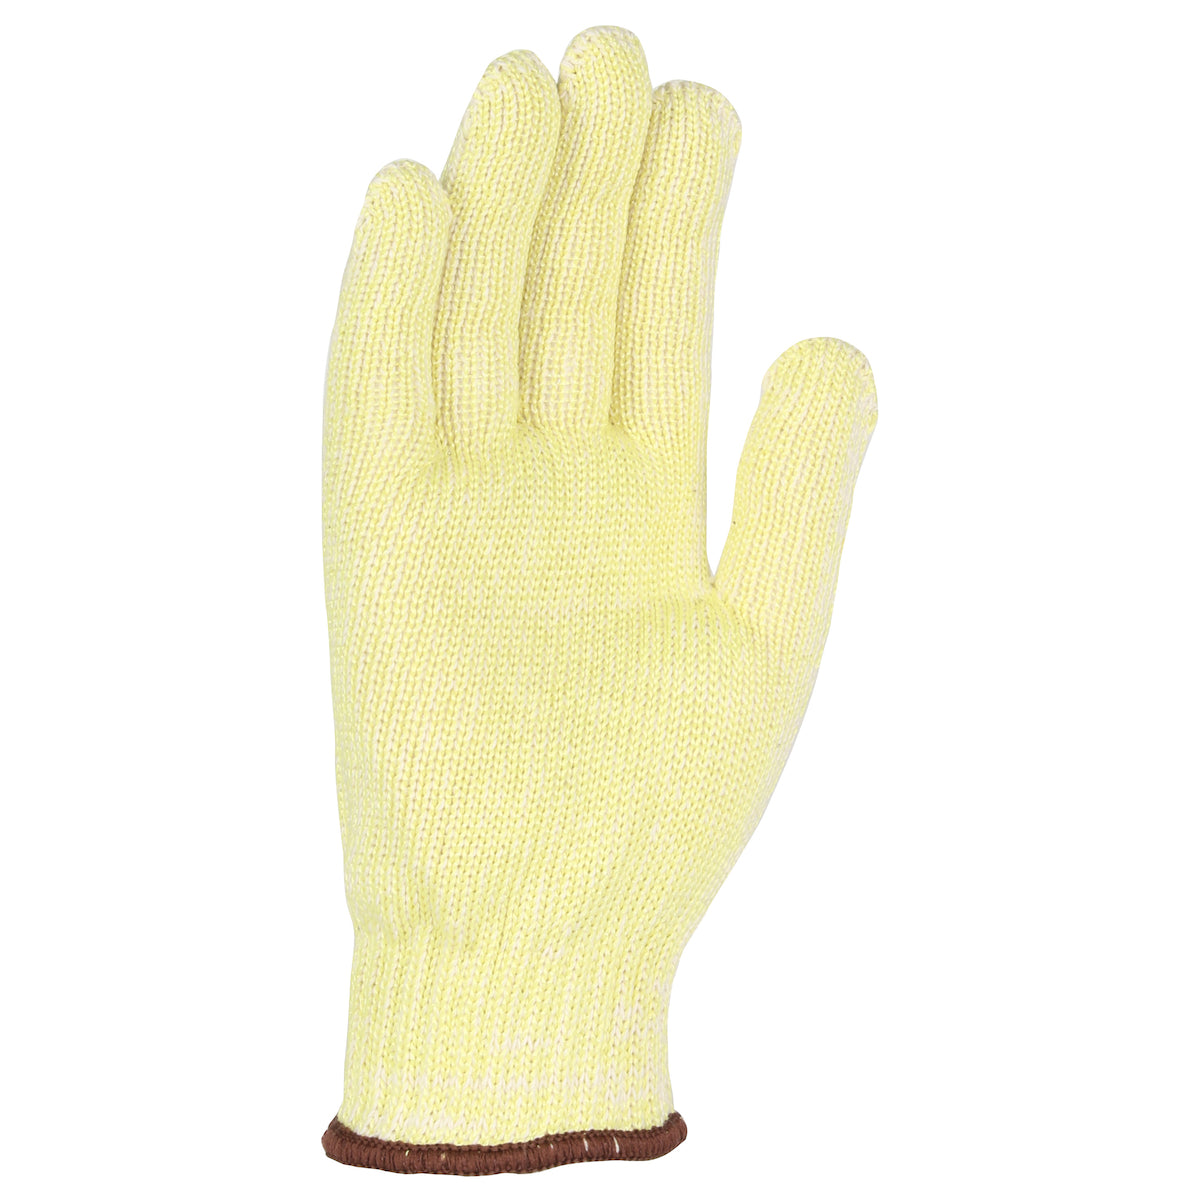 WPP MATW55PL-L Seamless Knit Aramid / Cotton Blended Glove - Heavy Weight